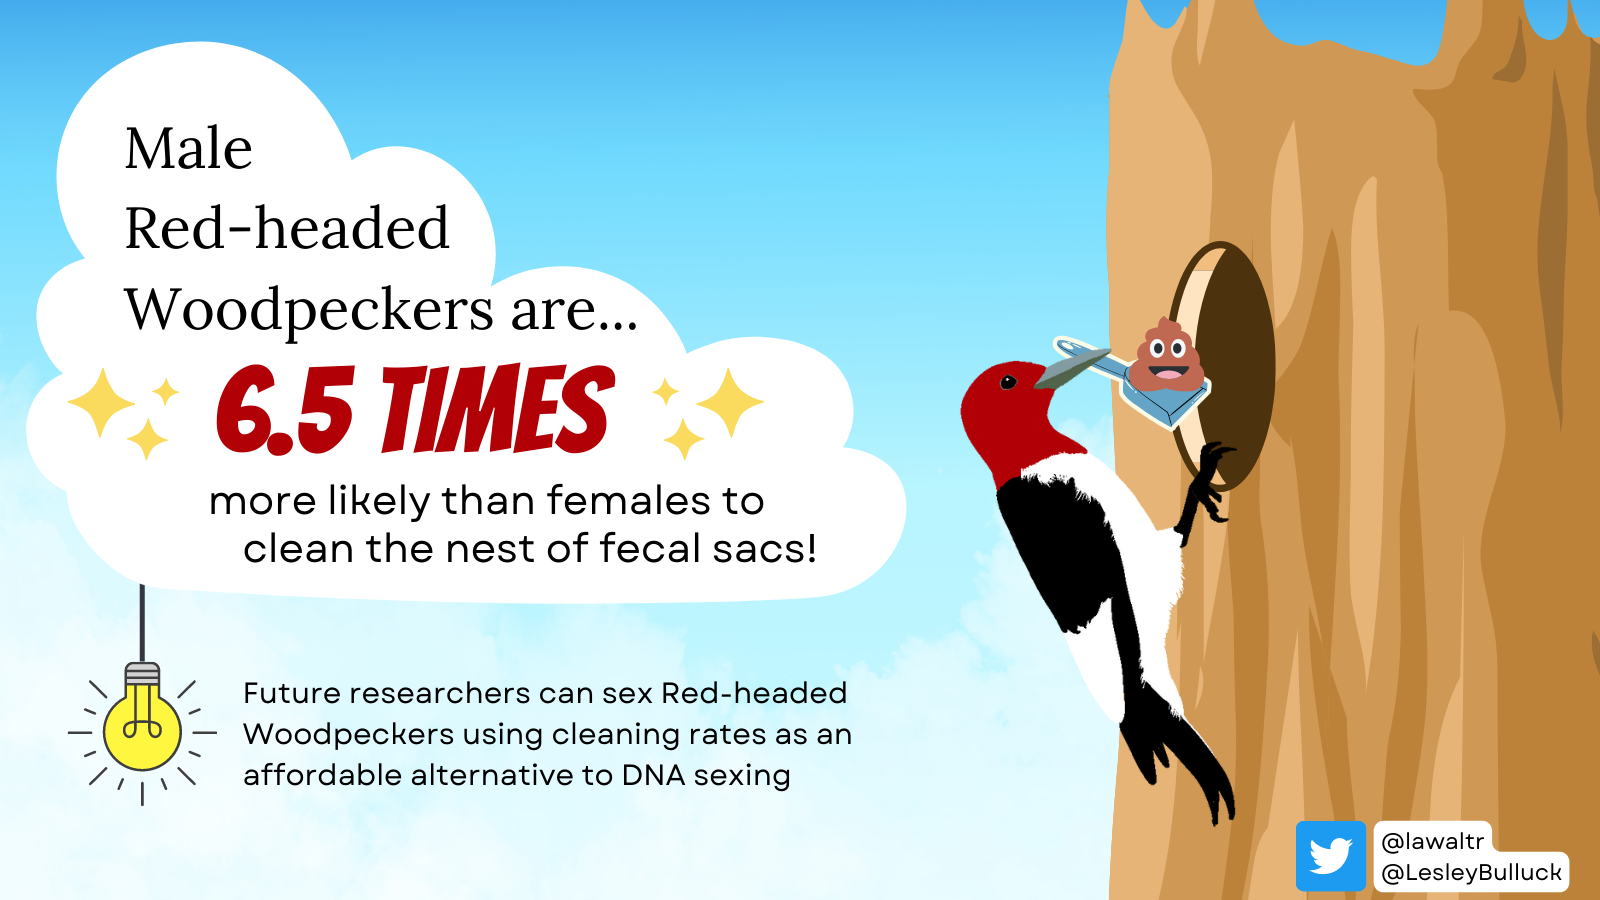 Males were 6 and a half times more likely than females to clean the nest of fecal sacs. Future researchers can sex Red-headed Woodpeckers using cleaning rates as an affordable alternative to DNA sequencing.